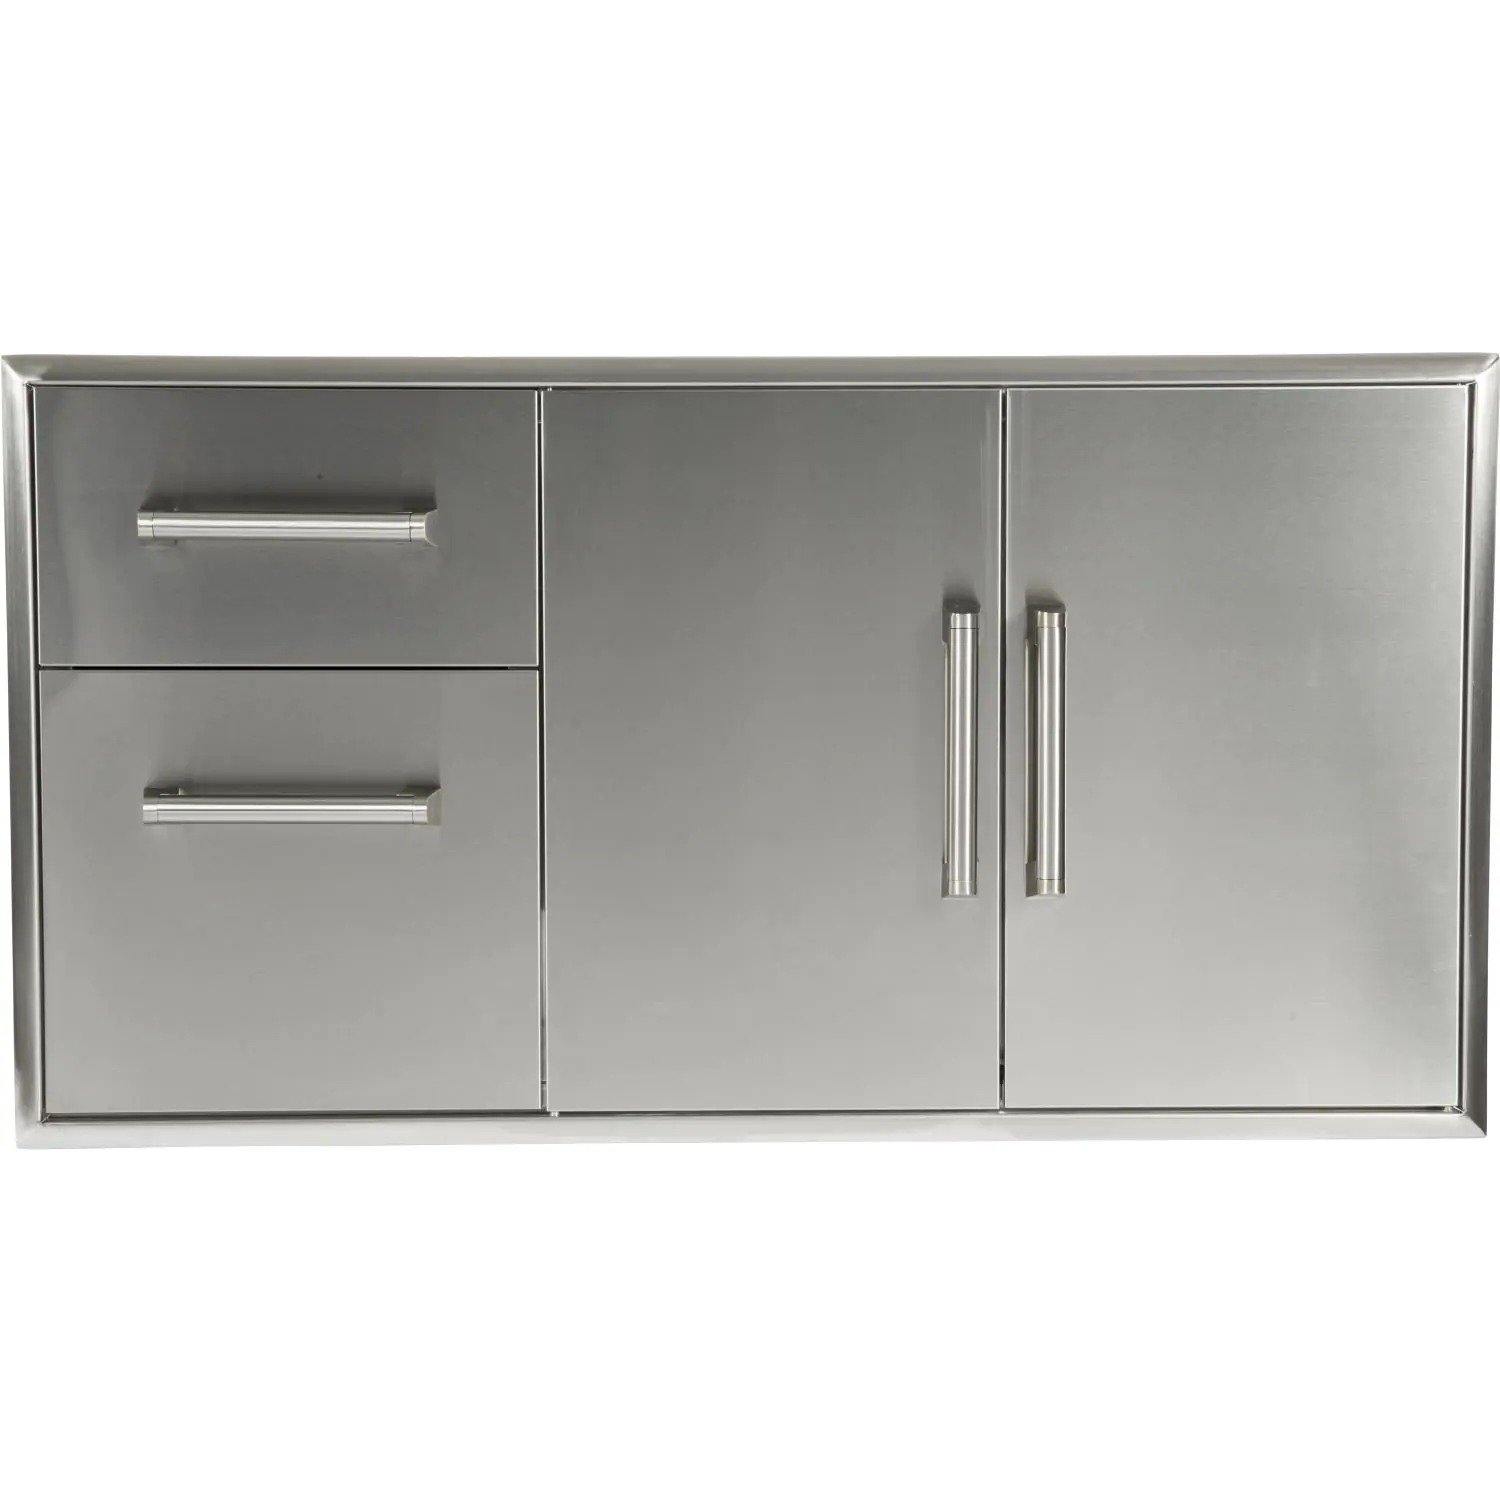 Coyote Combo Drawer Coyote - Combo Drawers: Two Drawer Cabinet plus Double Access Doors